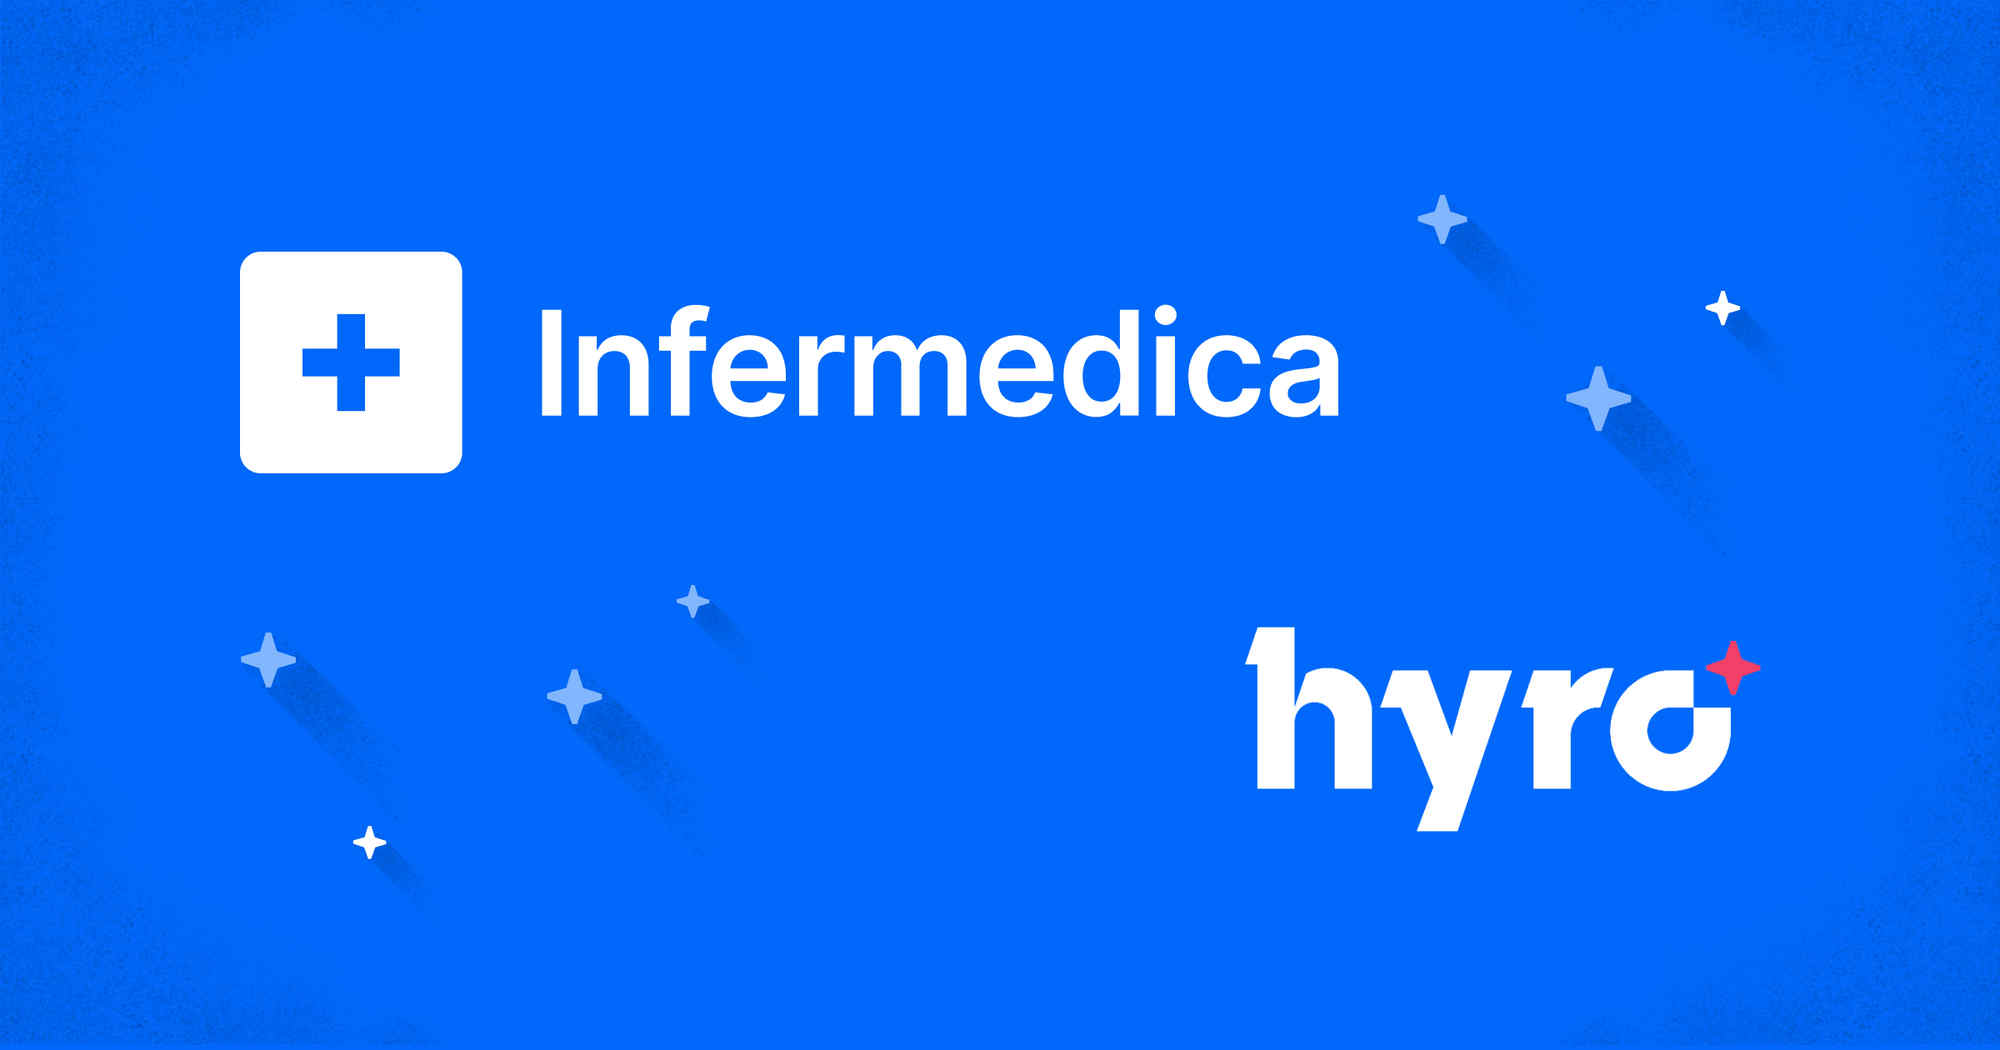 Infermedica partners with conversational AI company Hyro to support patient triage